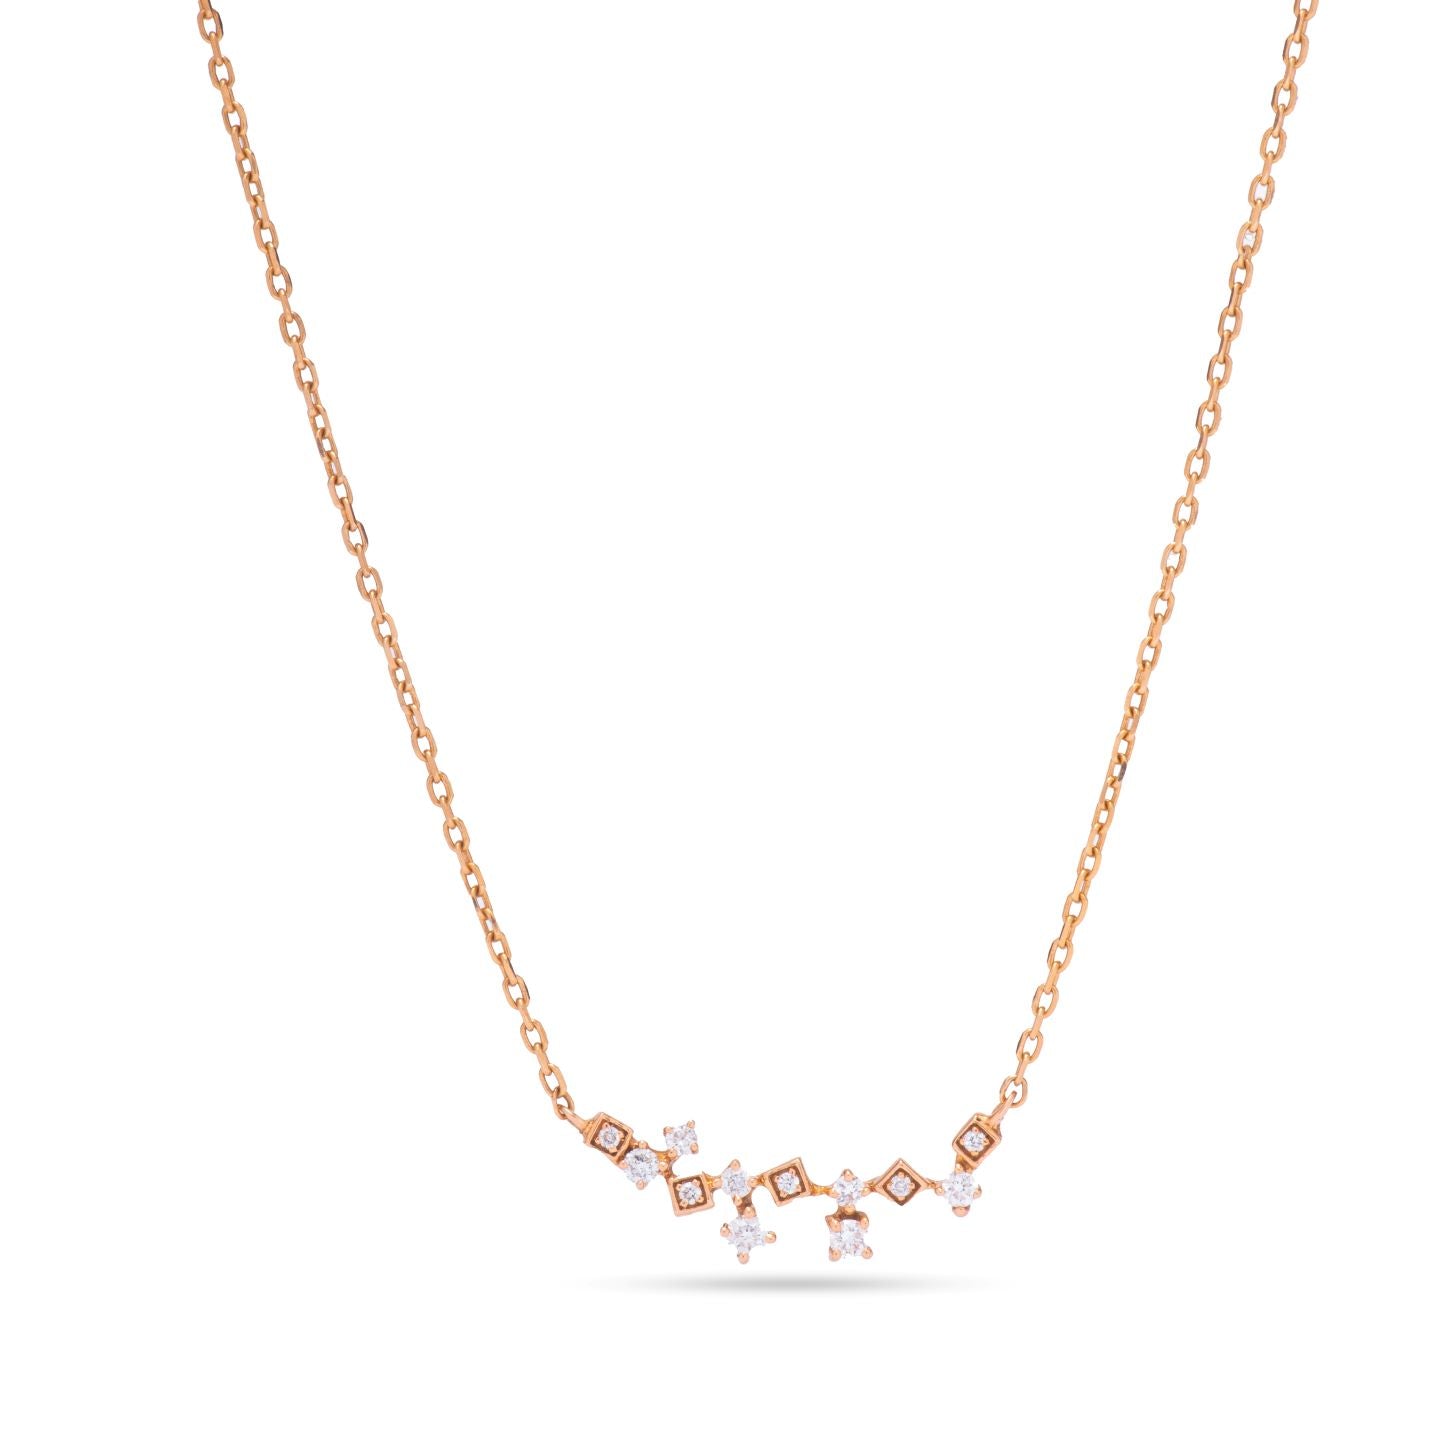 Flying diamonds necklace in 18k rose gold - SIR1138Q